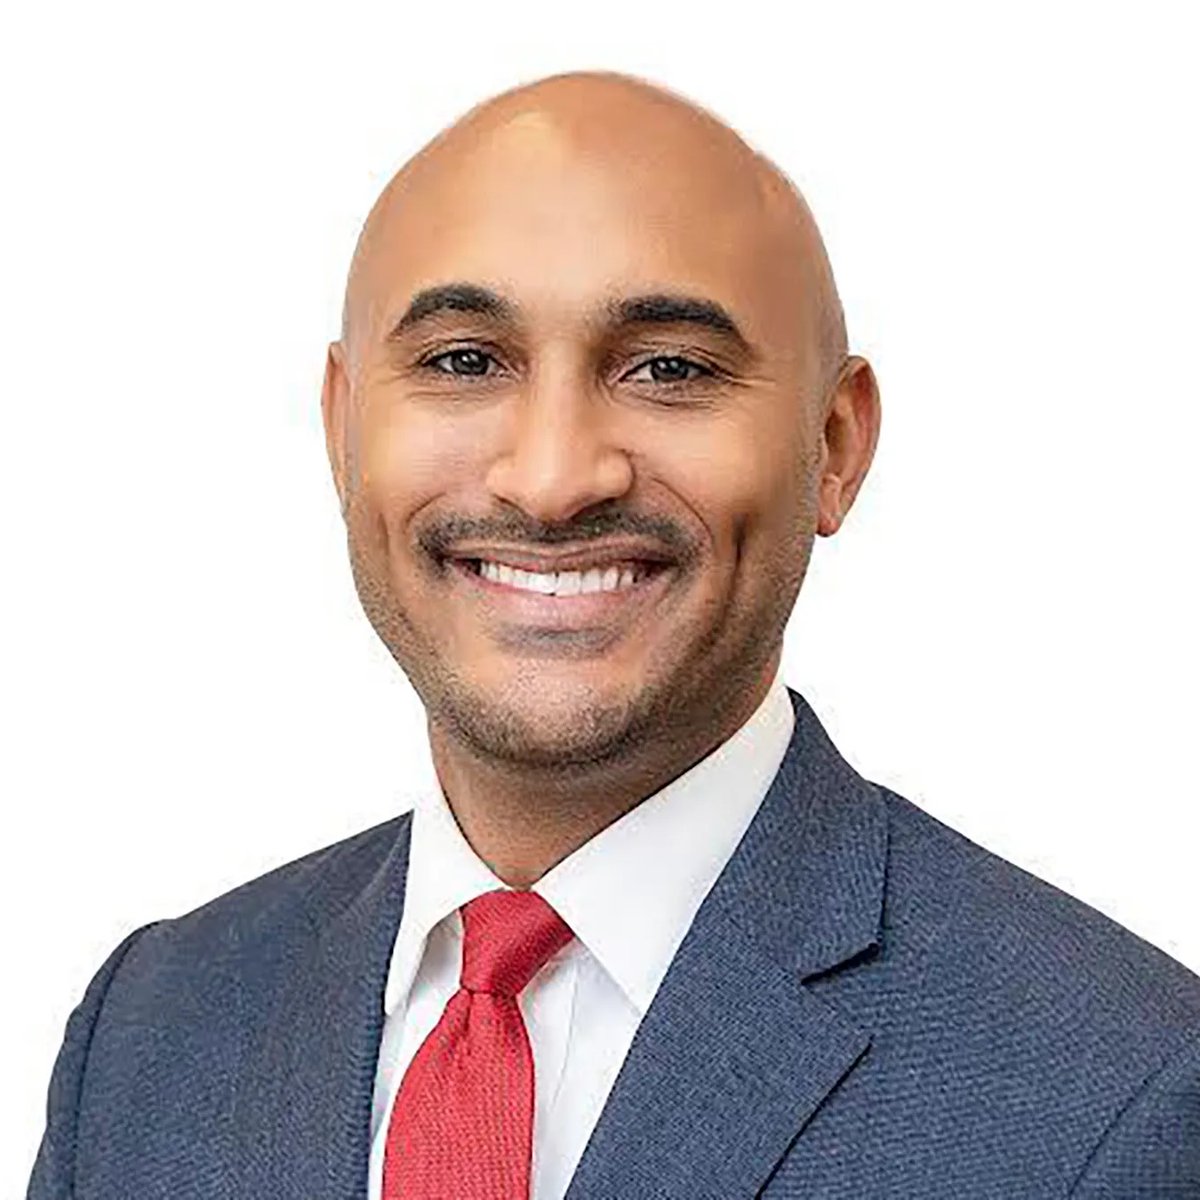 Congratulations to @ShomariFigures on last night’s victory in #AL02! 🎉 I am so excited to work with him and have him as a partner in Congress. I look forward to rolling up my sleeves and getting to work to elect @ShomariFigures to Congress in November!